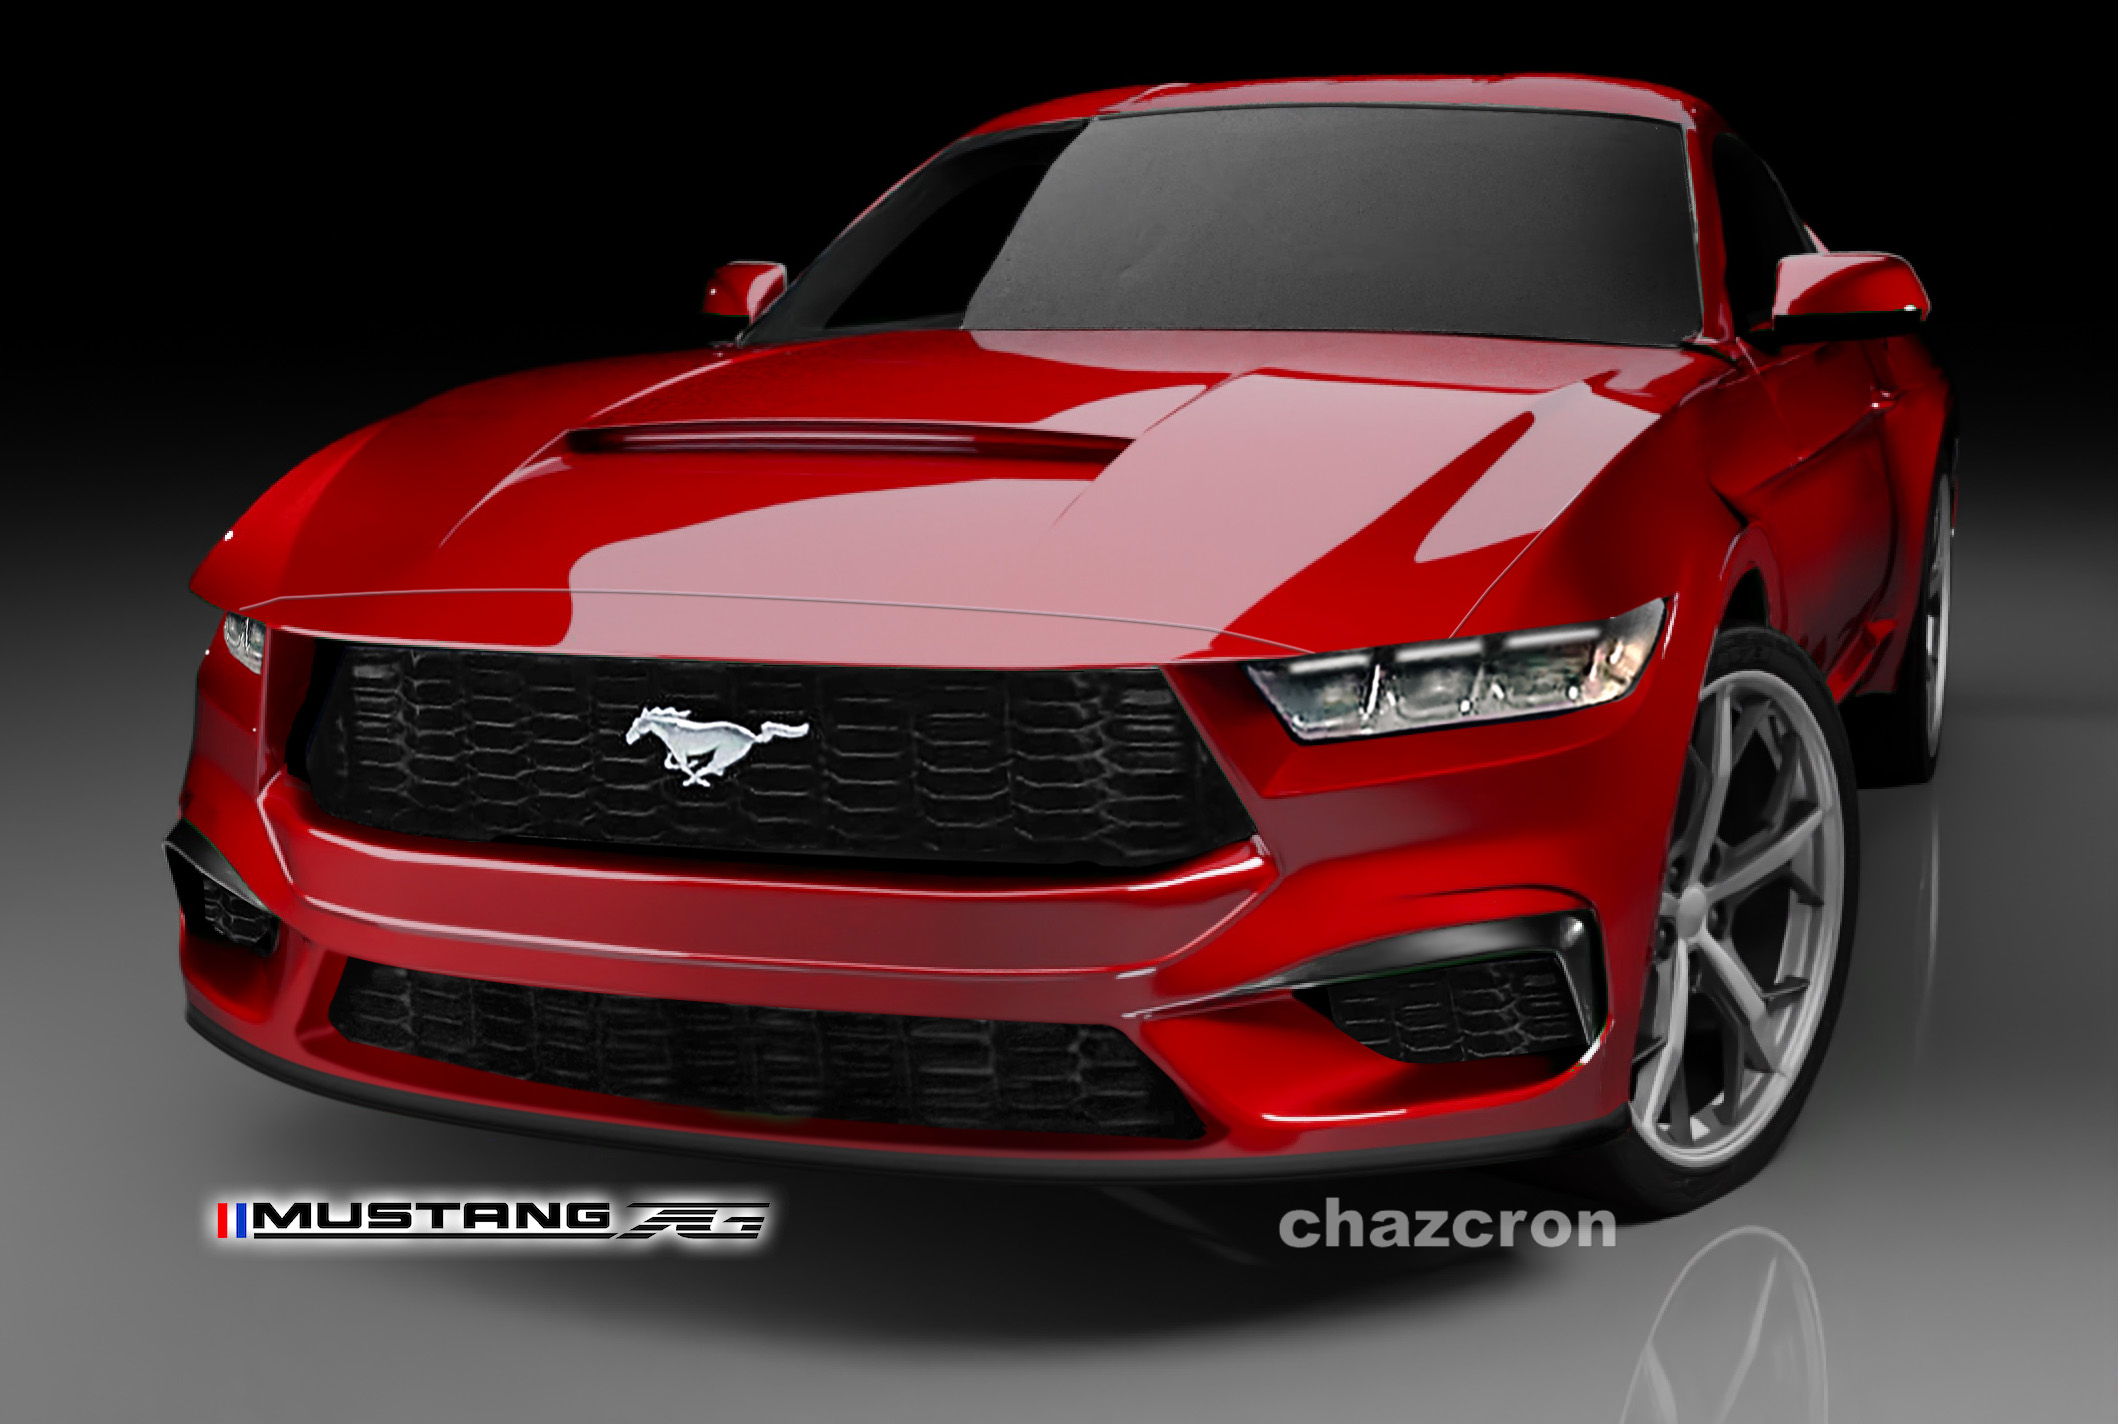 S650 Mustang chazcron weighs in... 7th gen 2023 Mustang S650 3D model & renderings in several colors! S655_RD_starter